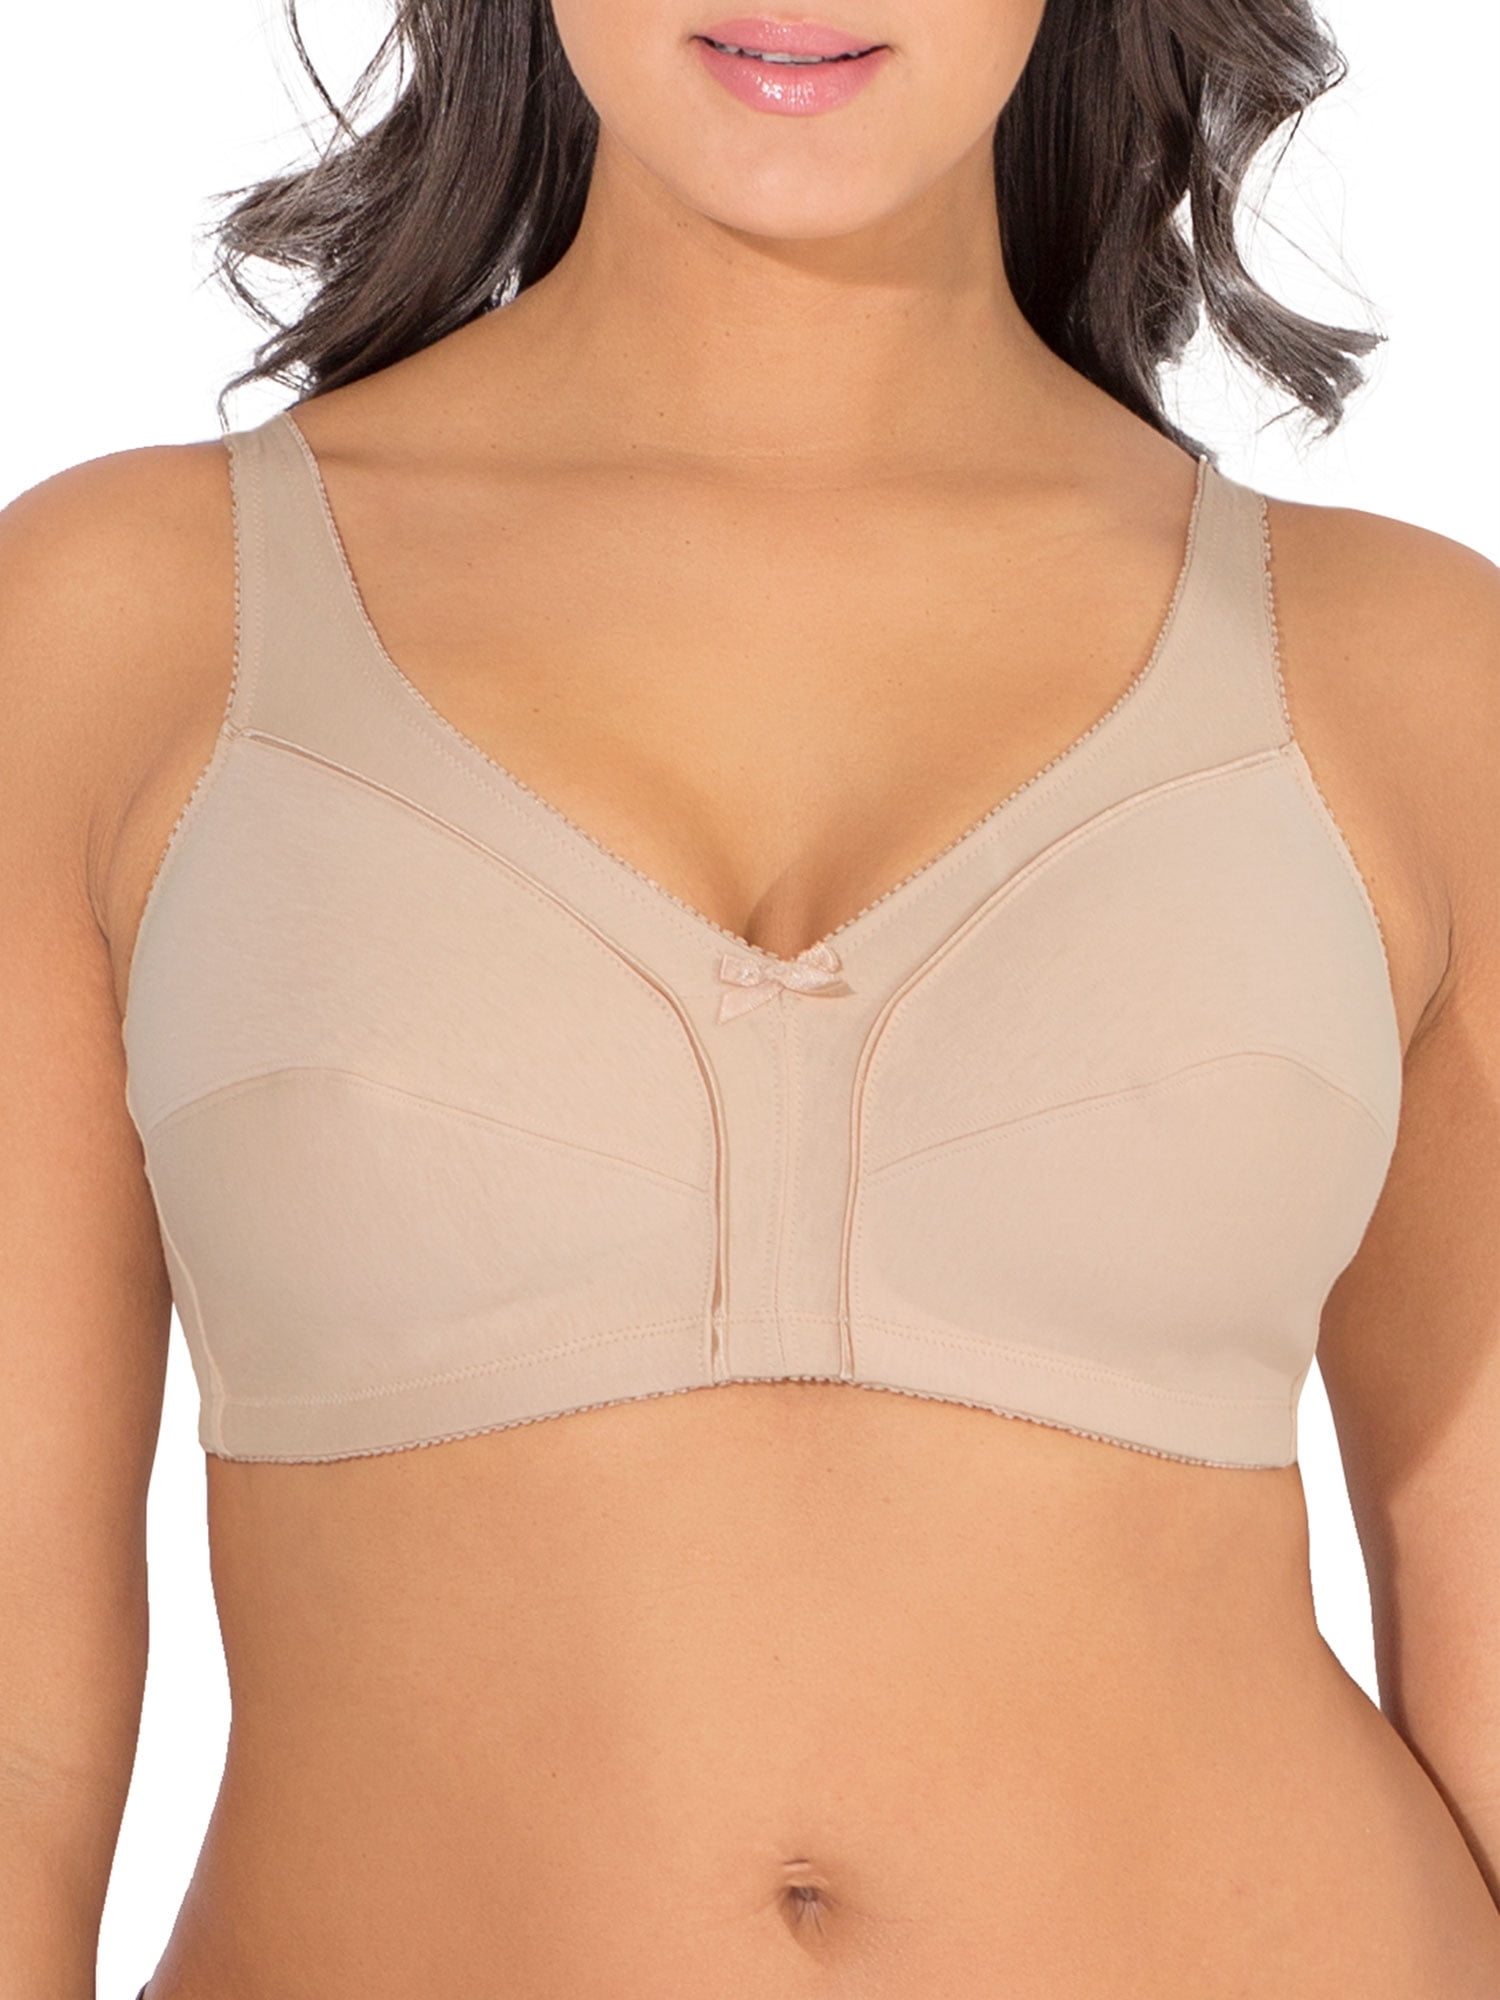 Fruit of the Loom Women's Seamed Wirefree Bra (36C, Black) at